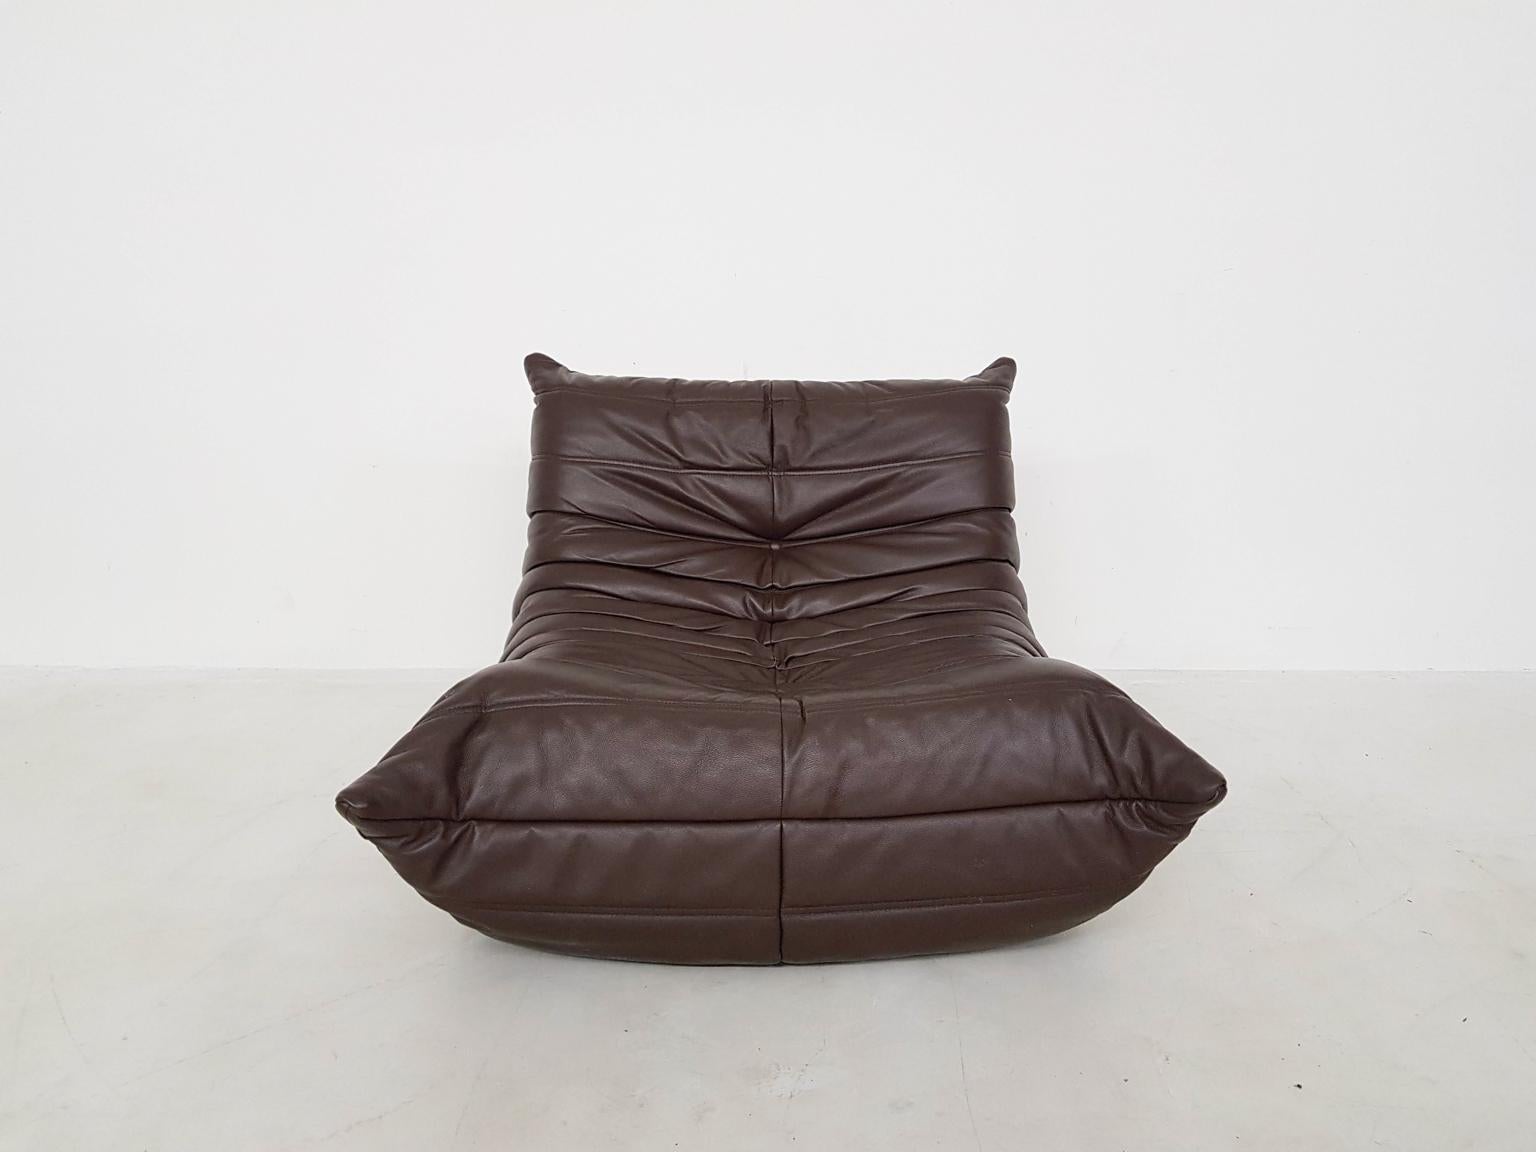 The famous lounge chair by Michel Ducaroy for Ligne Roset. Ducaroy designed the Togo as a chair without a frame. The inside of the chair only consists of foam. Very comfortable!

This Togo is a fully original piece. This means it has its original